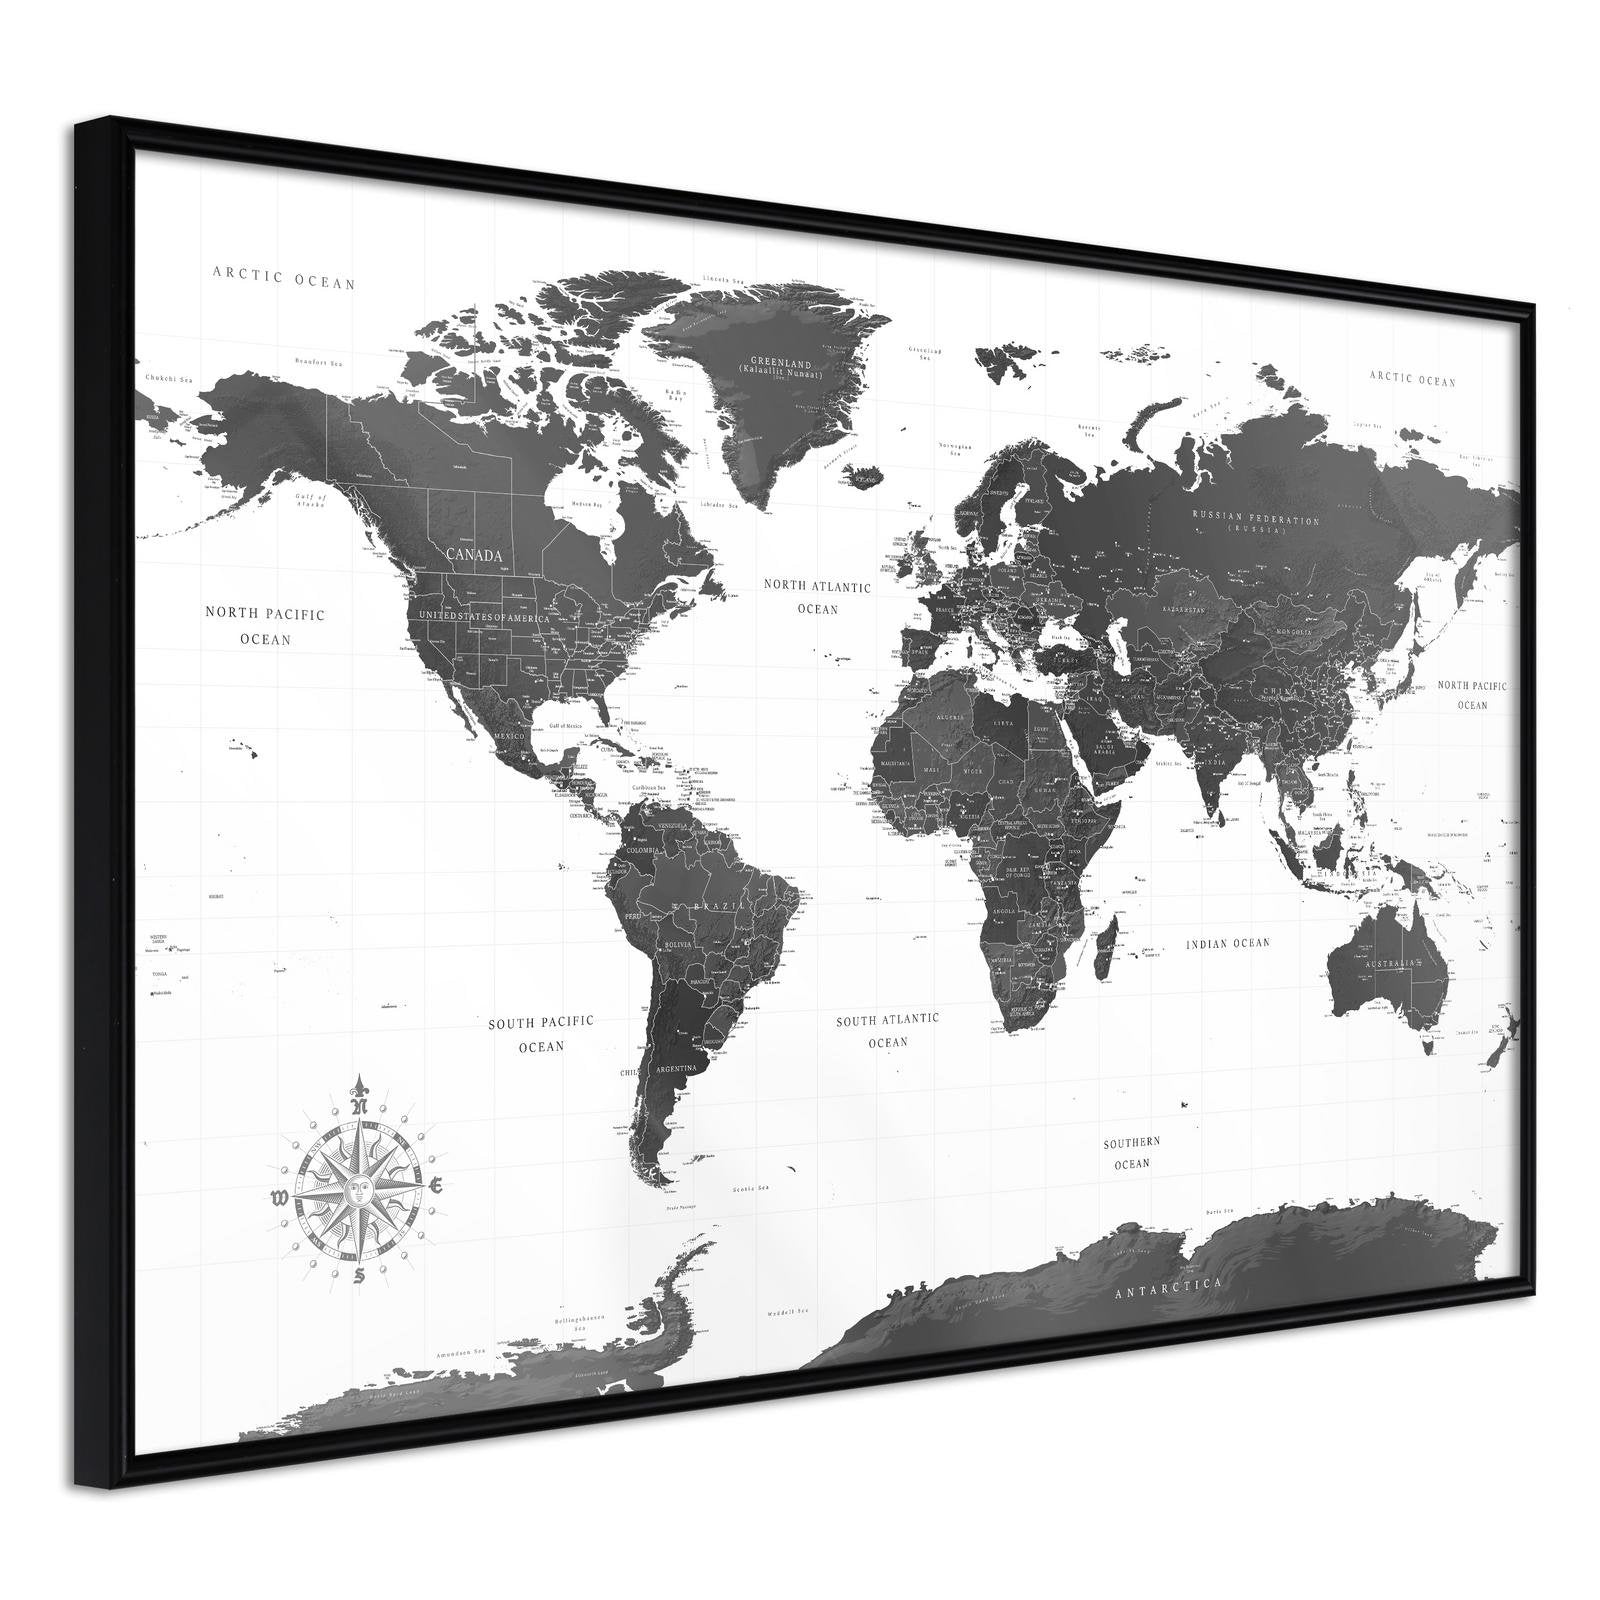 Inramad Poster / Tavla - The World in Black and White-Poster Inramad-Artgeist-30x20-Svart ram-peaceofhome.se